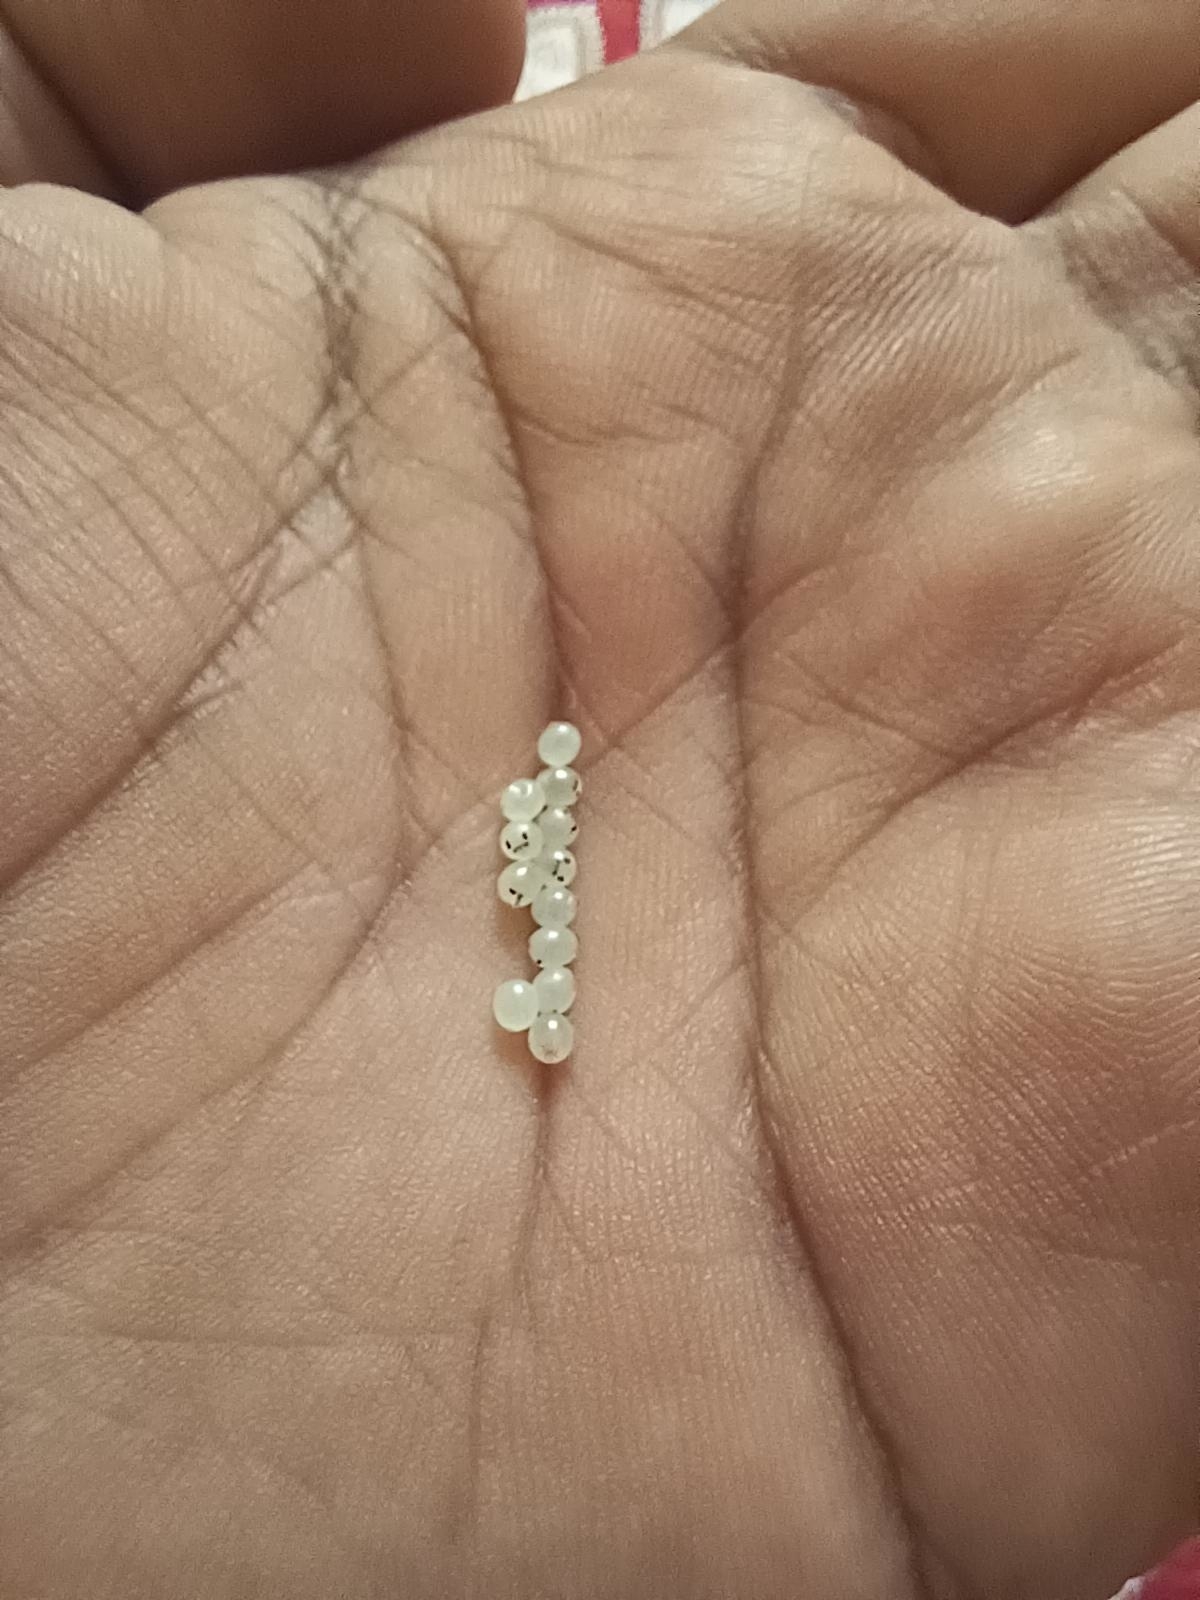 What look like tiny pearls with little dots on them in the palm of a hand